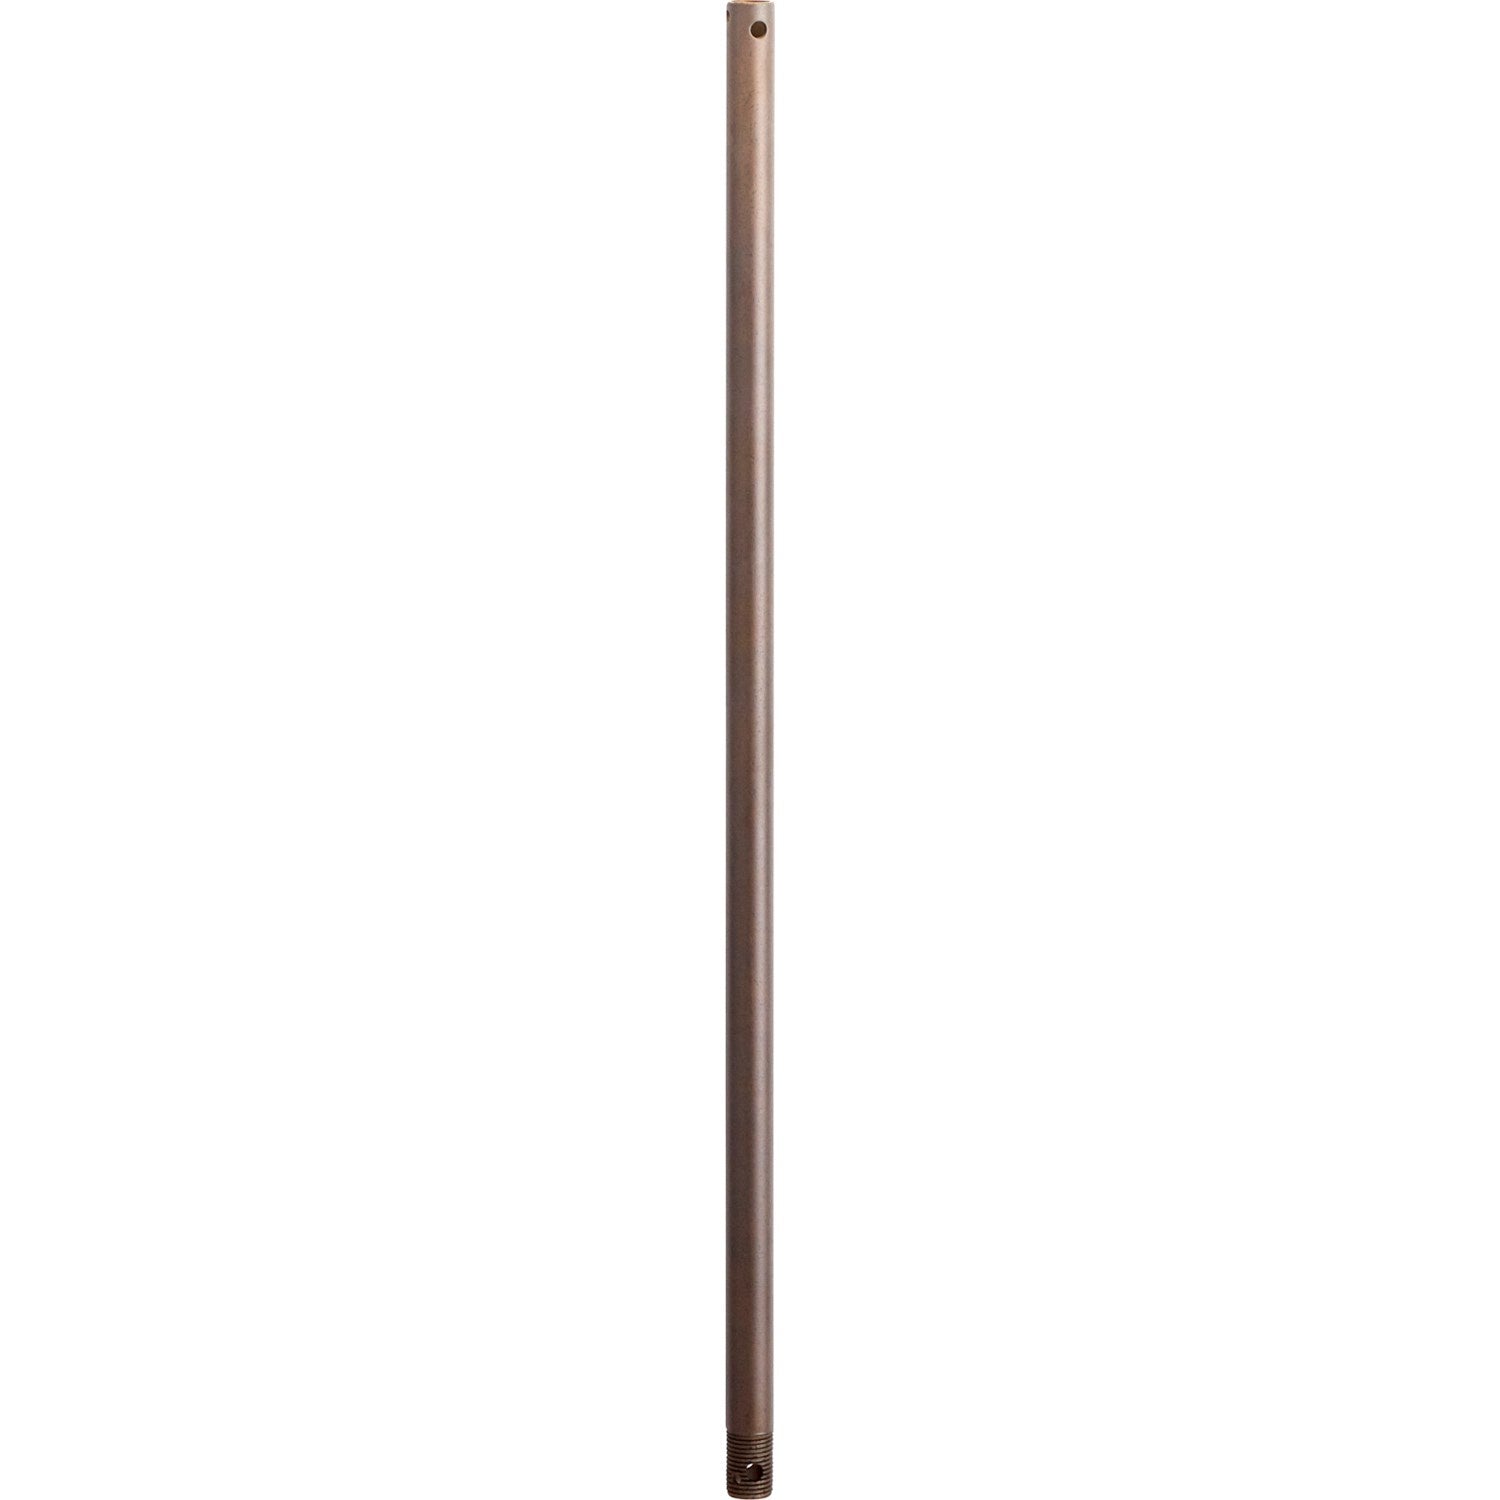 Quorum - 6-2486 - 24" Universal Downrod - 24 in. Downrods - Oiled Bronze